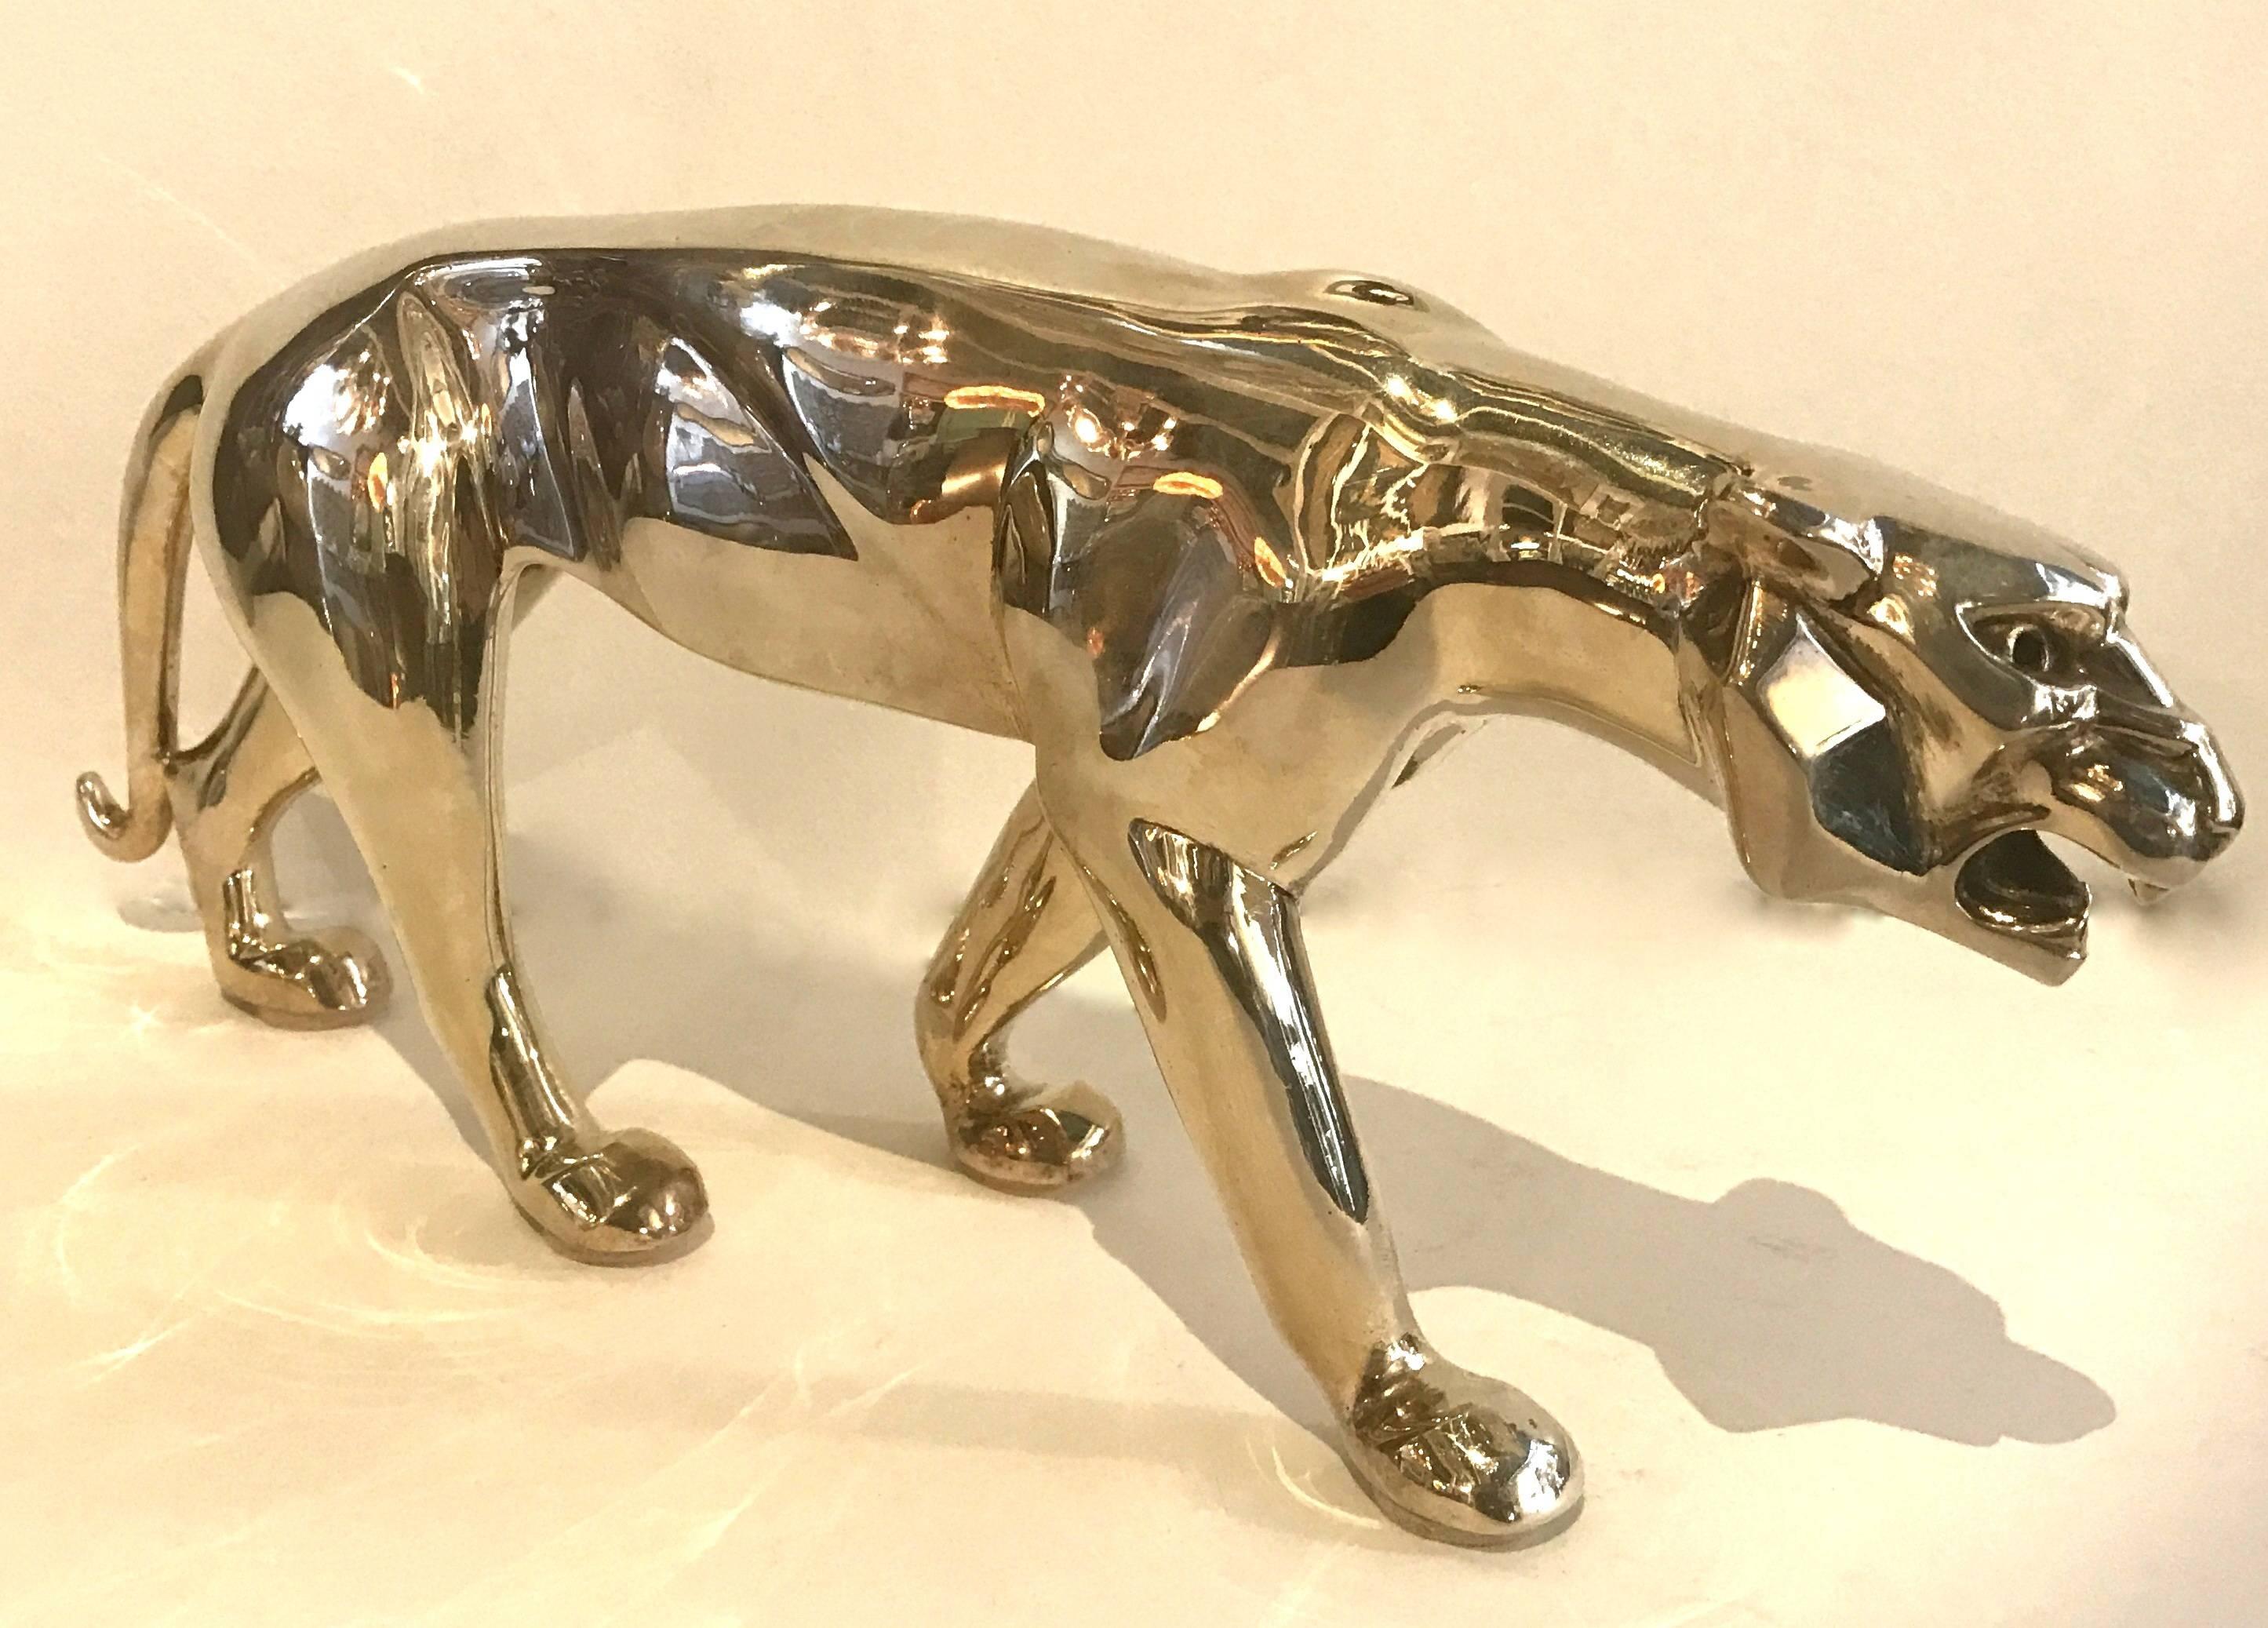 Sleek French Art Deco silvered bronze panther by Georges Lavroff (1895-1991), a Russian born sculptor, who lived and worked in France.
Signature on the back paw.